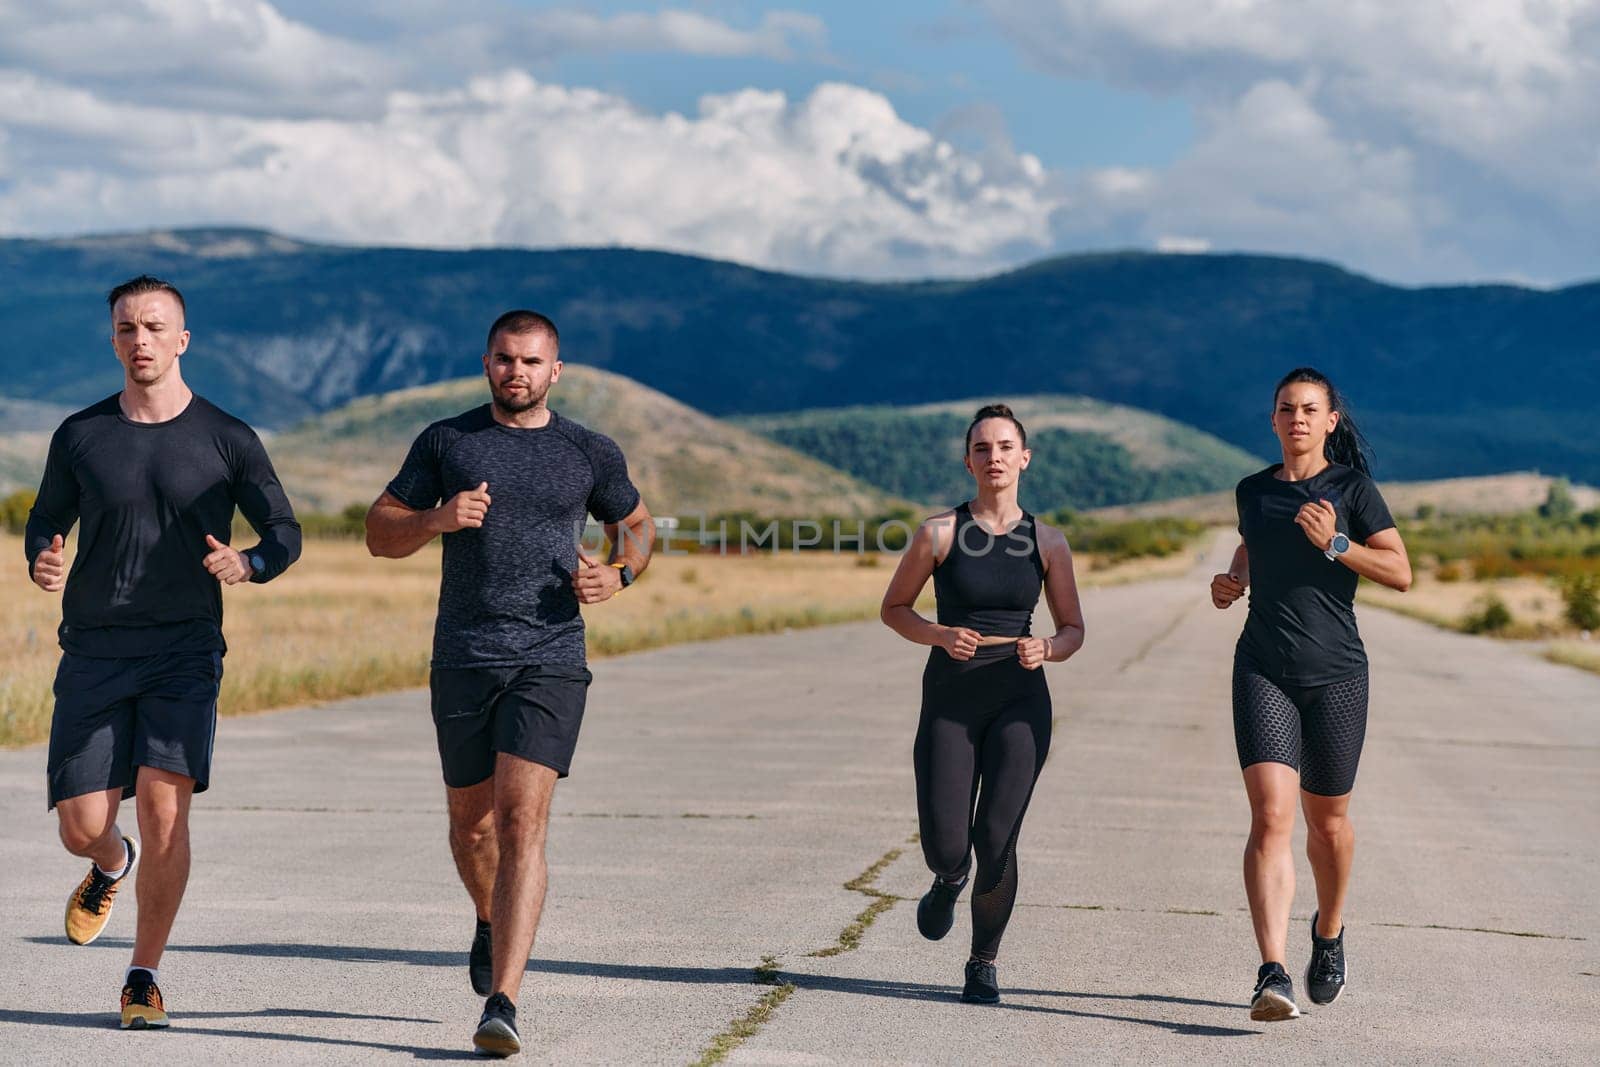 A professional athletic team as they train rigorously, running towards peak performance in preparation for an upcoming marathon.